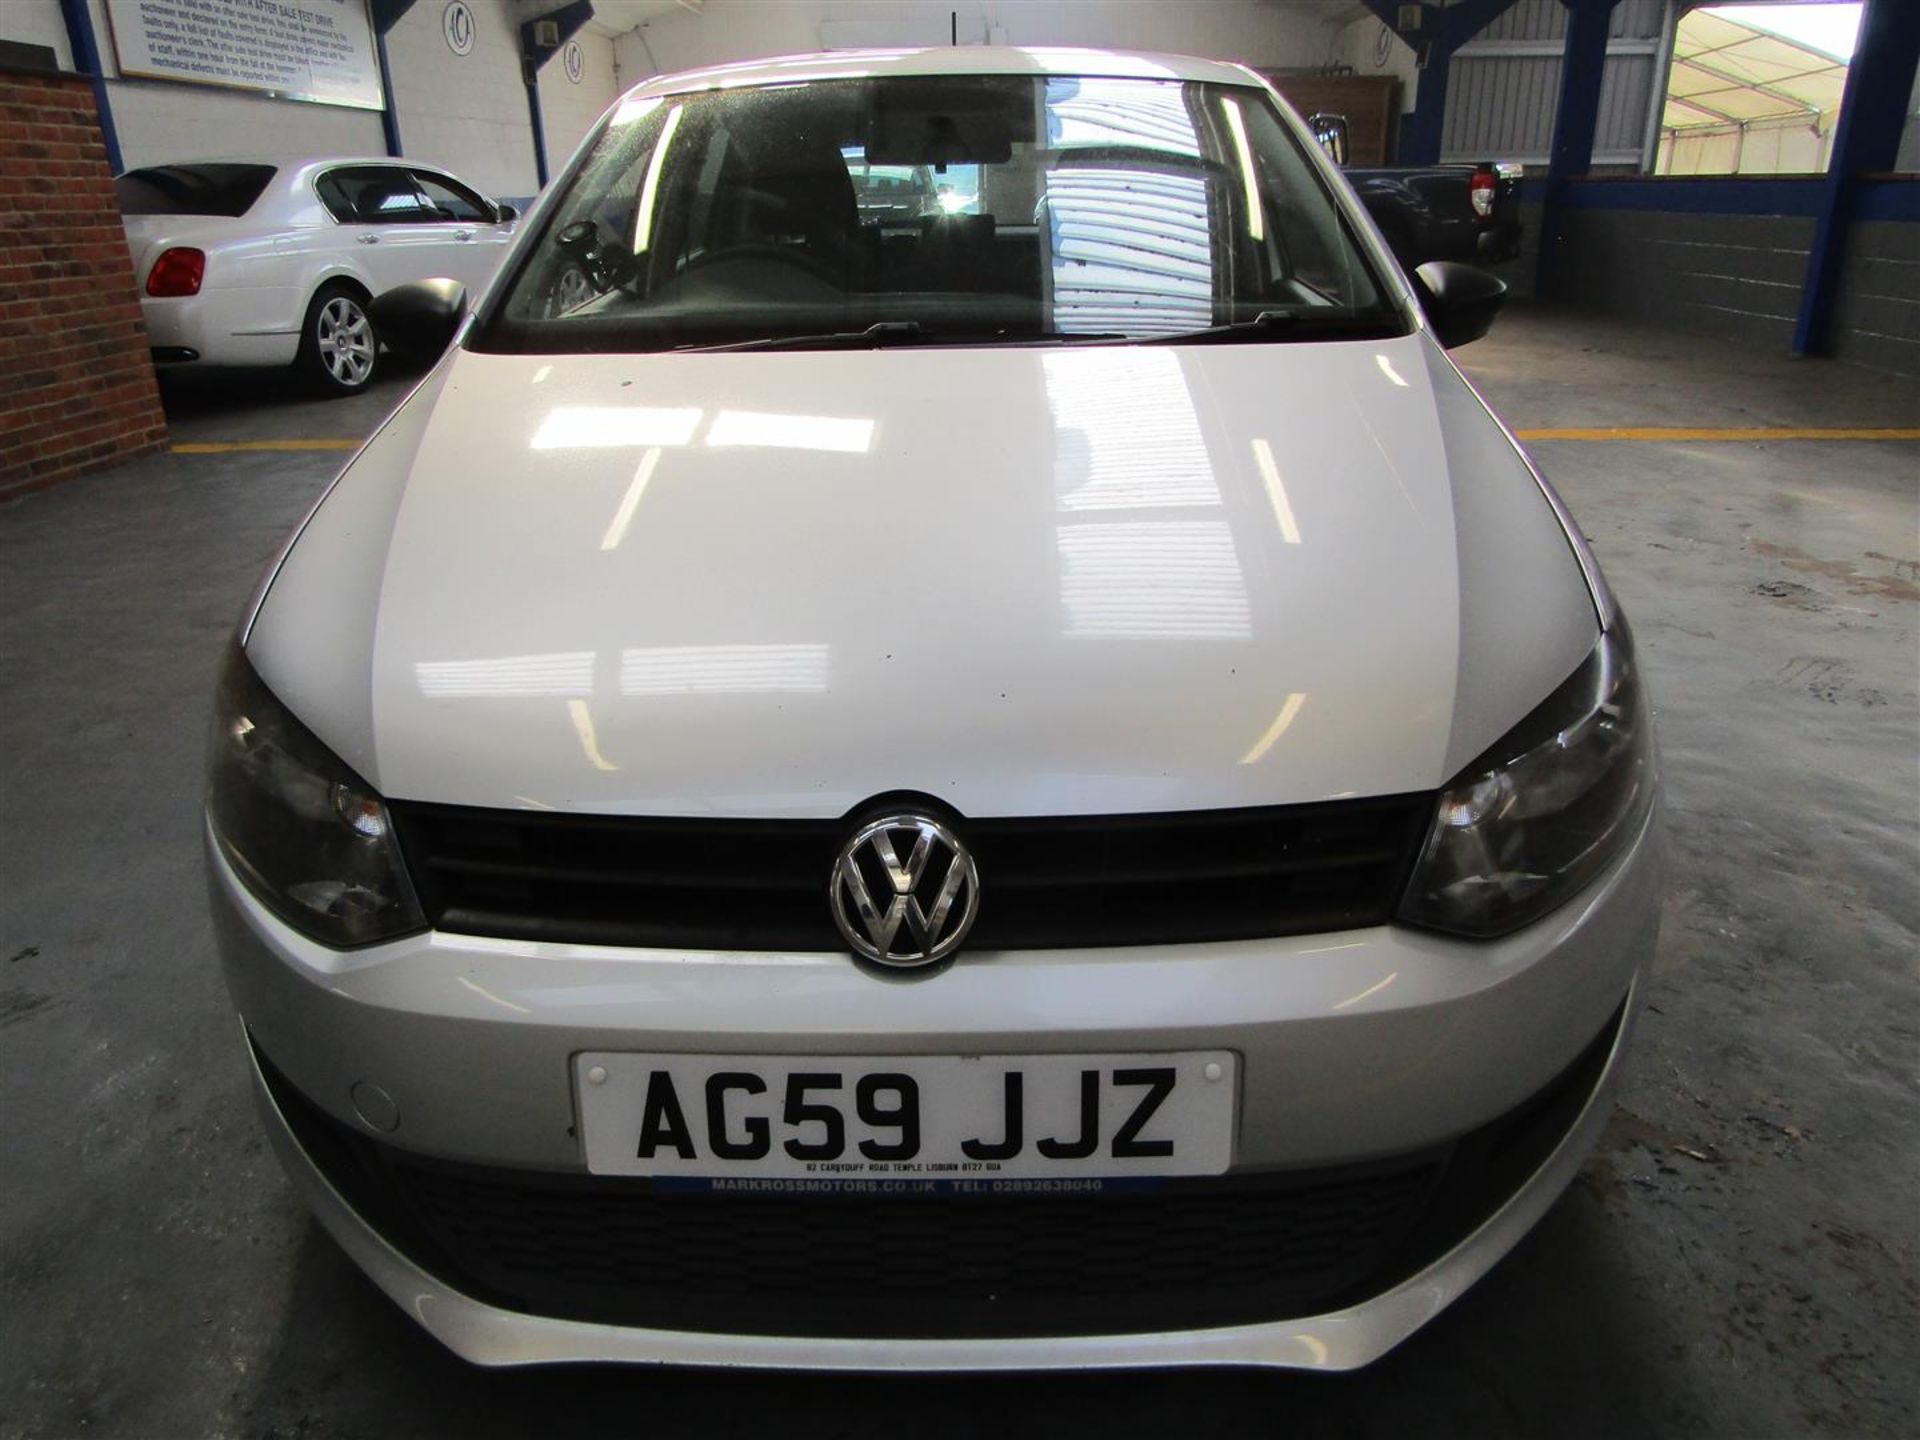 59 10 VW Polo S 60 - Image 3 of 29